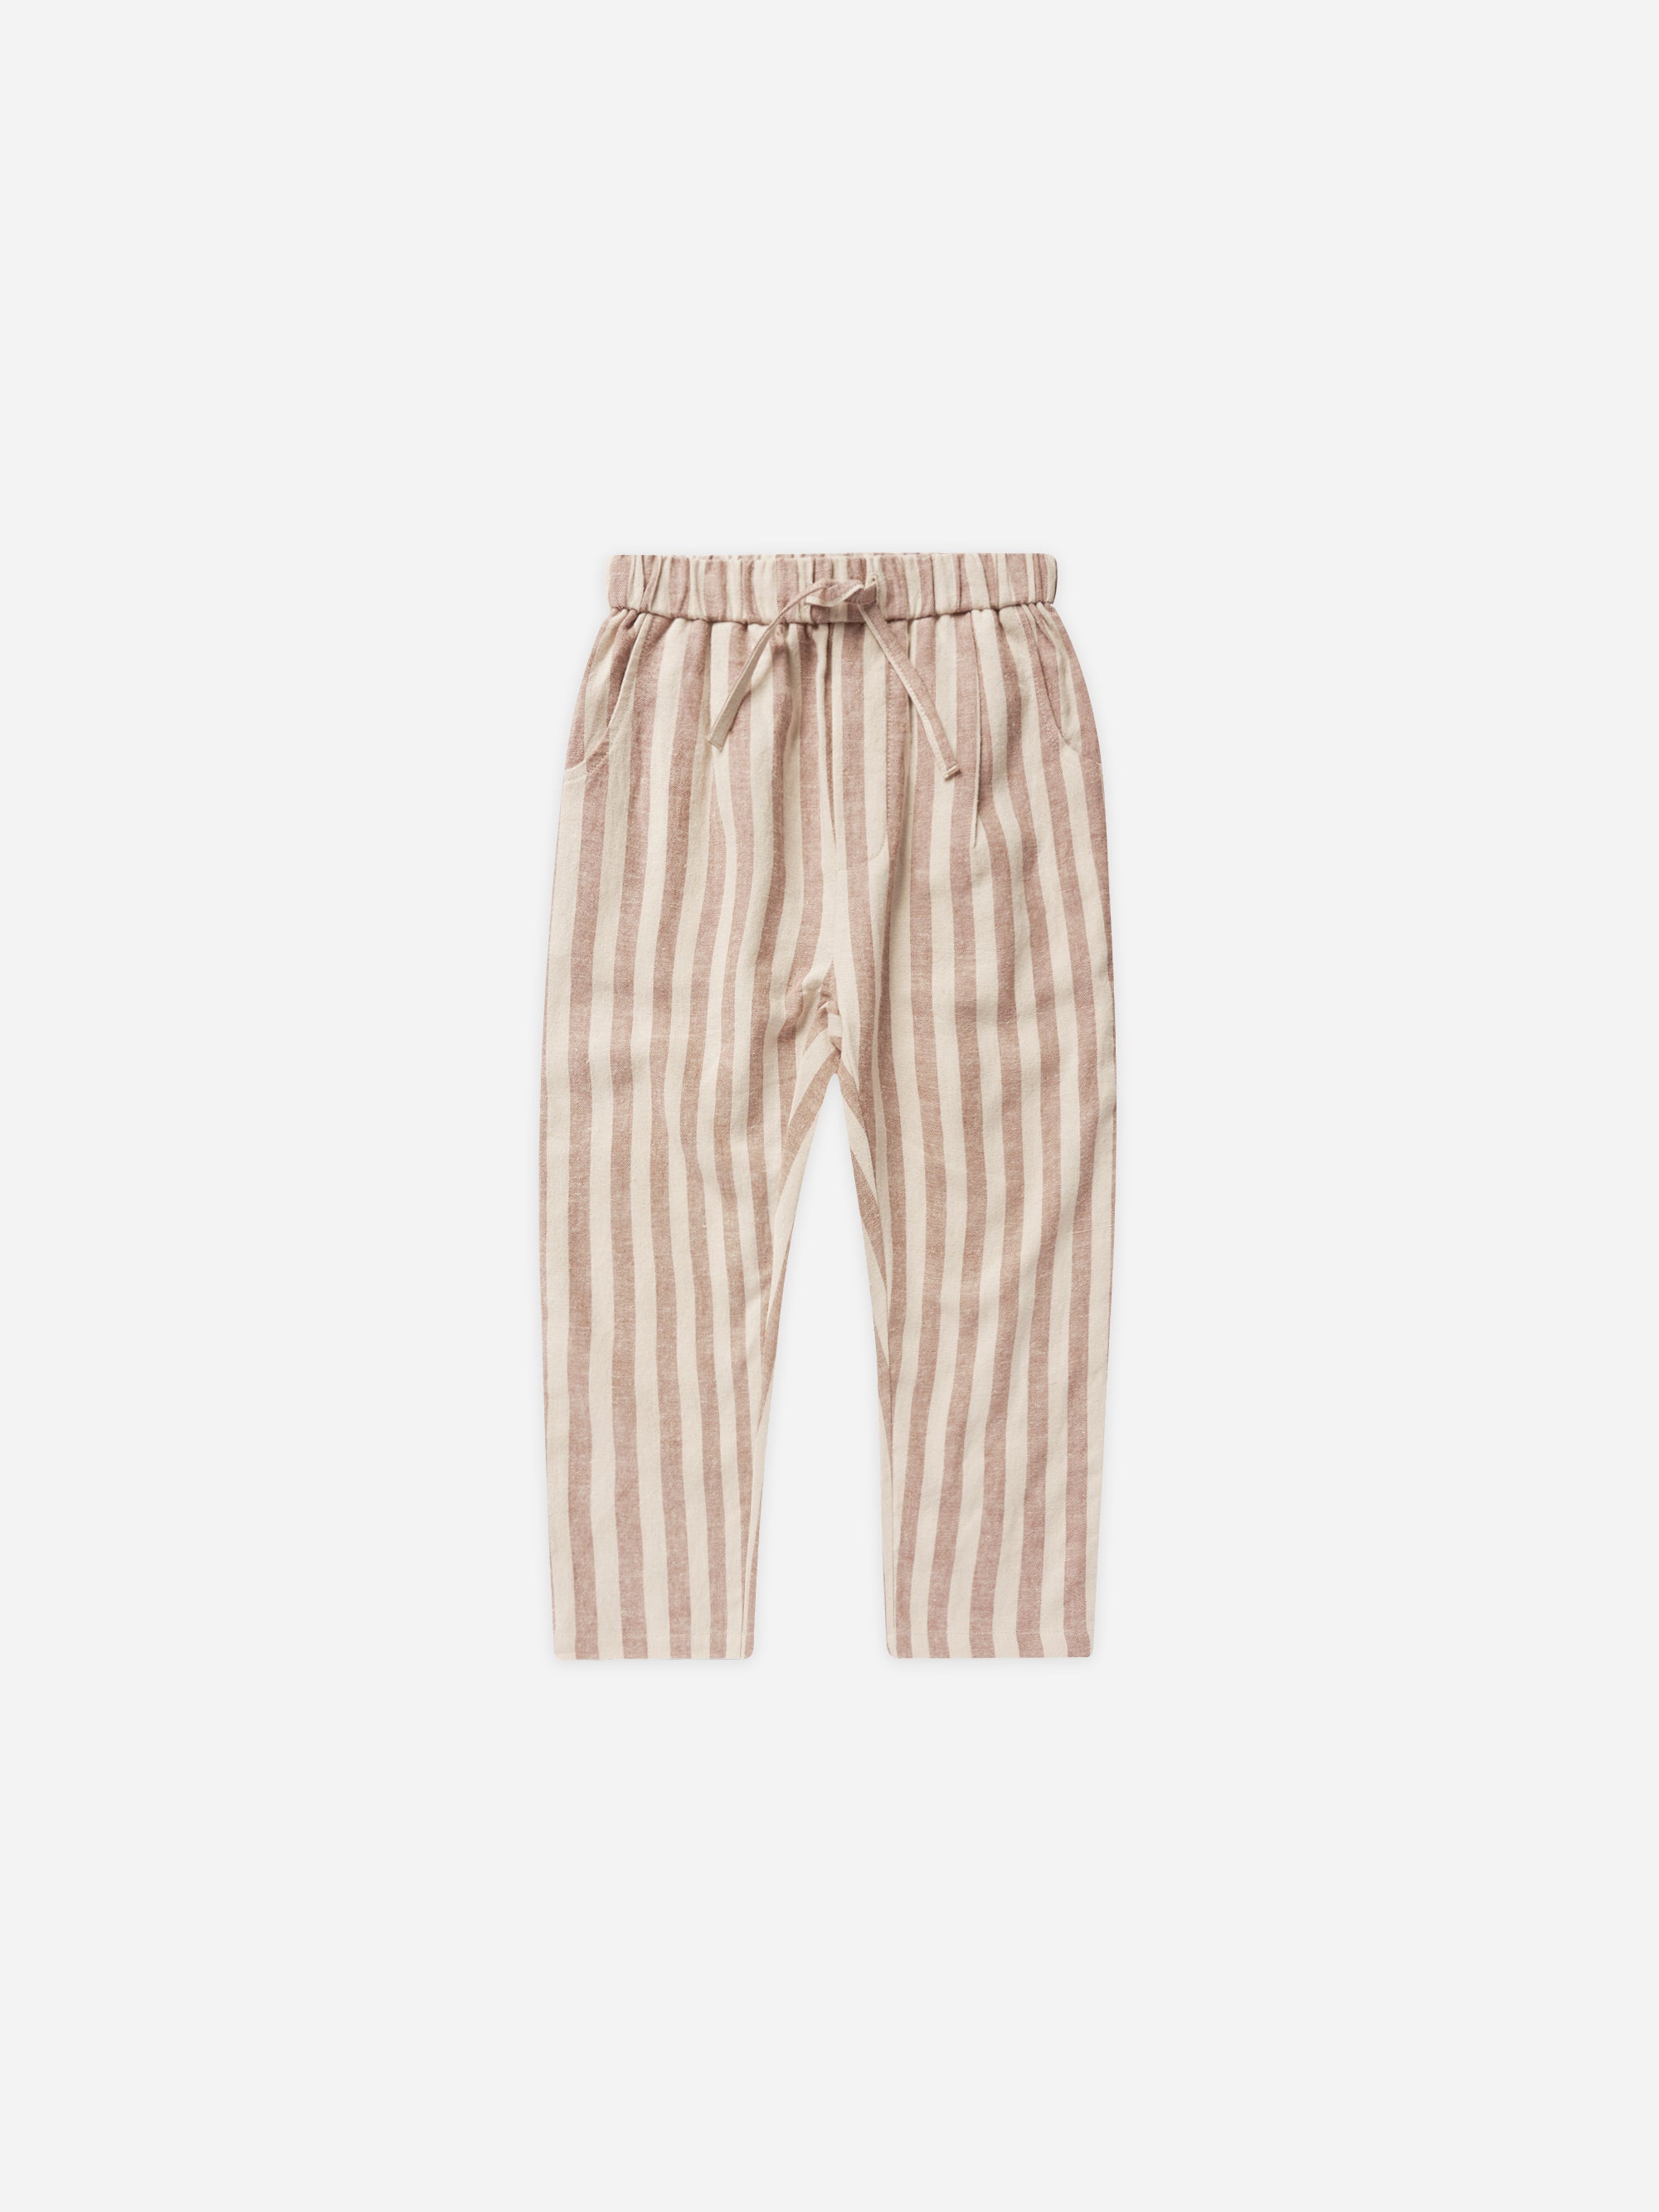 Ethan Trouser || Clay Stripe - Rylee + Cru | Kids Clothes | Trendy Baby Clothes | Modern Infant Outfits |